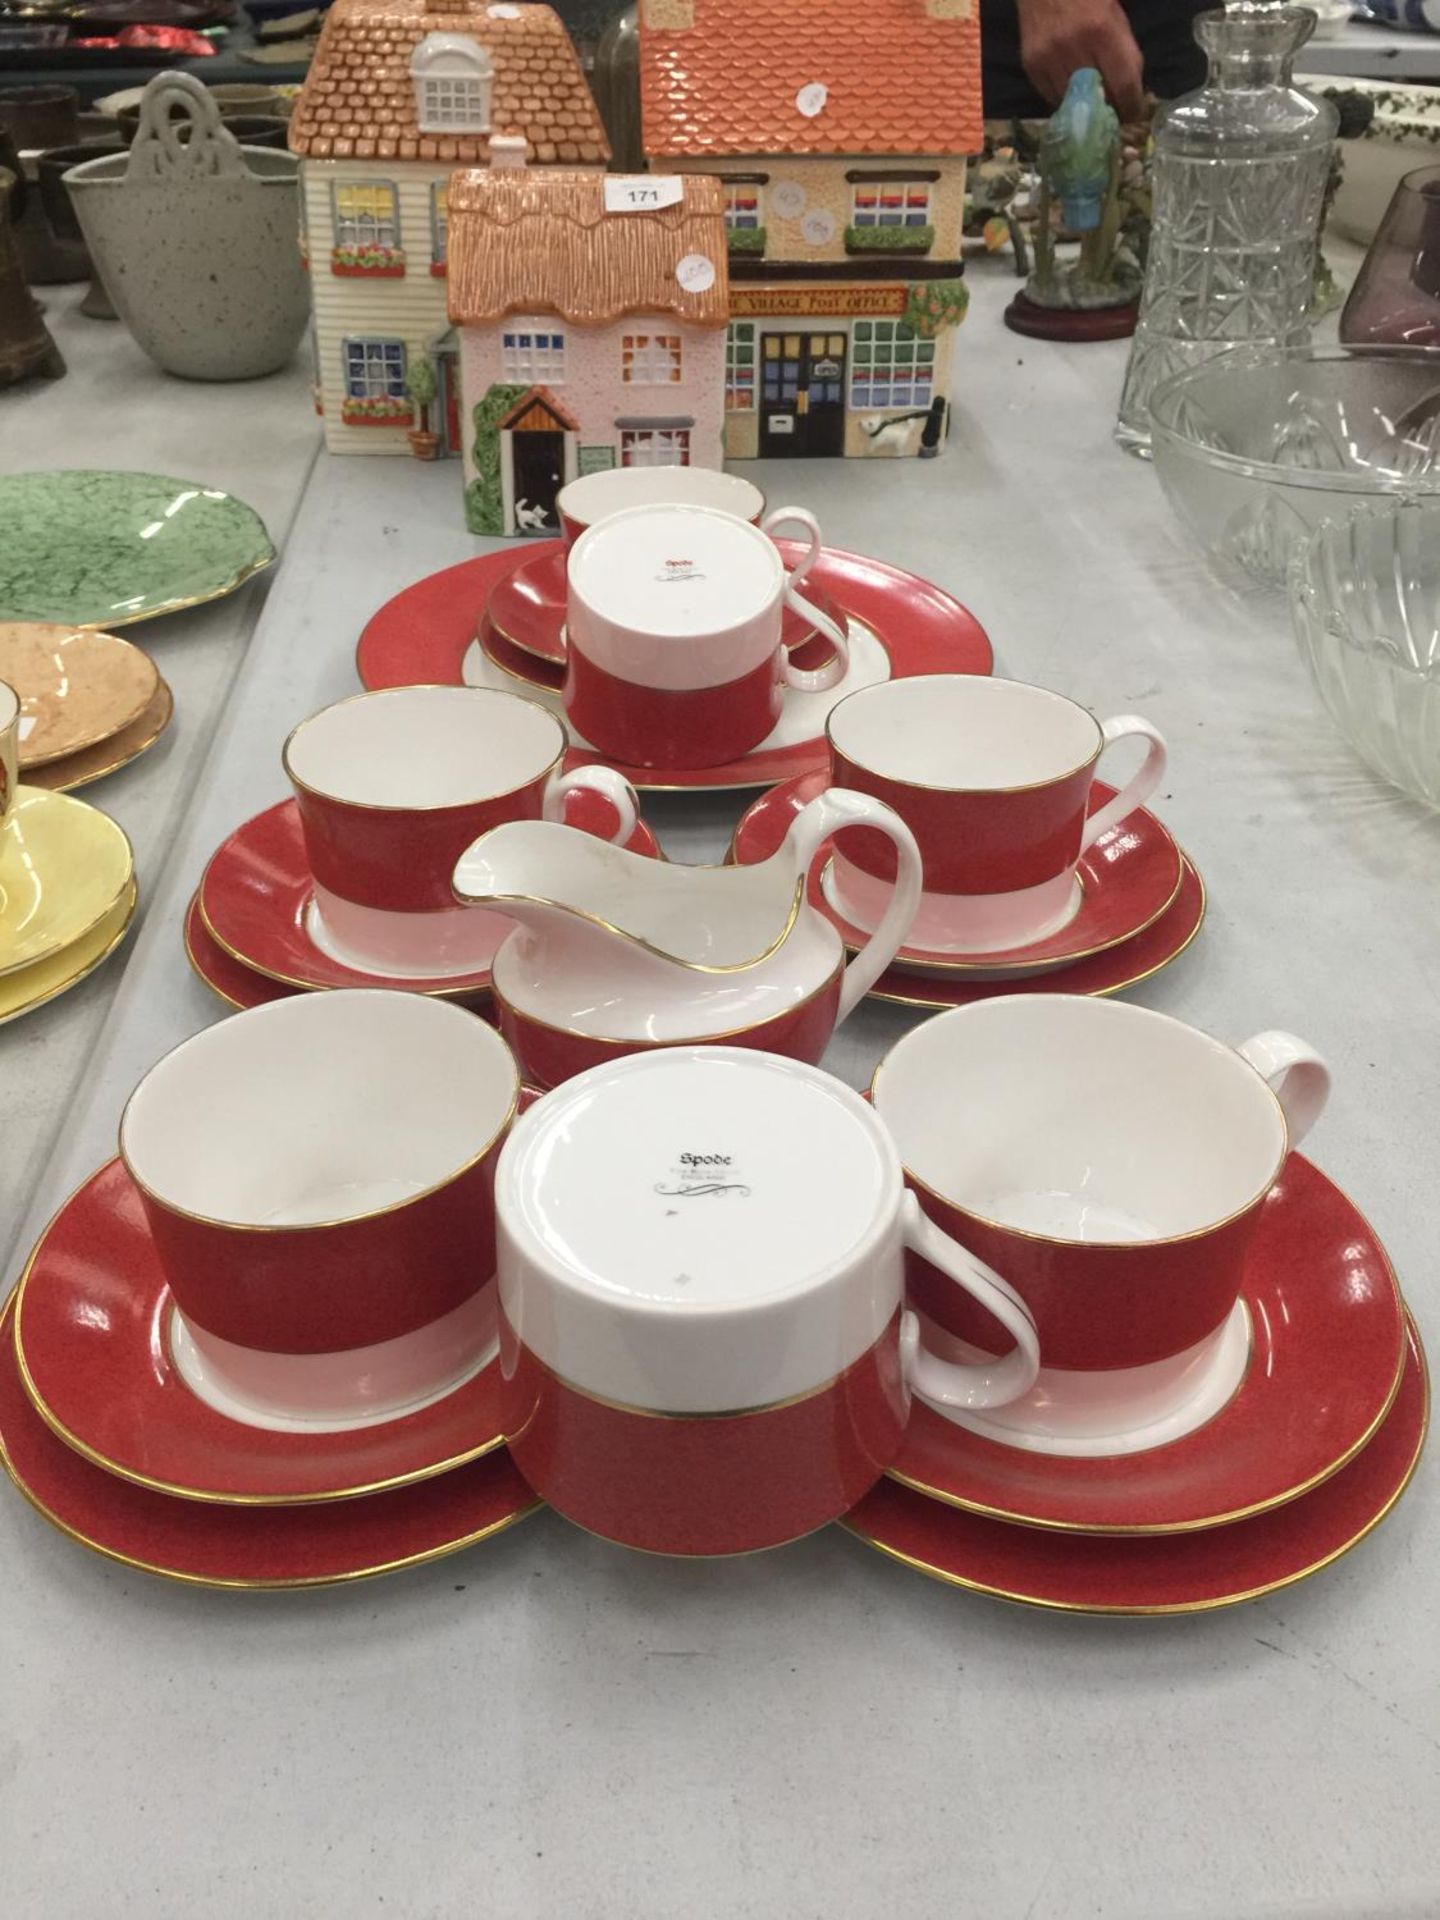 A QUANTITY OF SPODE ORANGE AND WHITE CUPS, SAUCERS, PLATES, ETC - Image 2 of 4